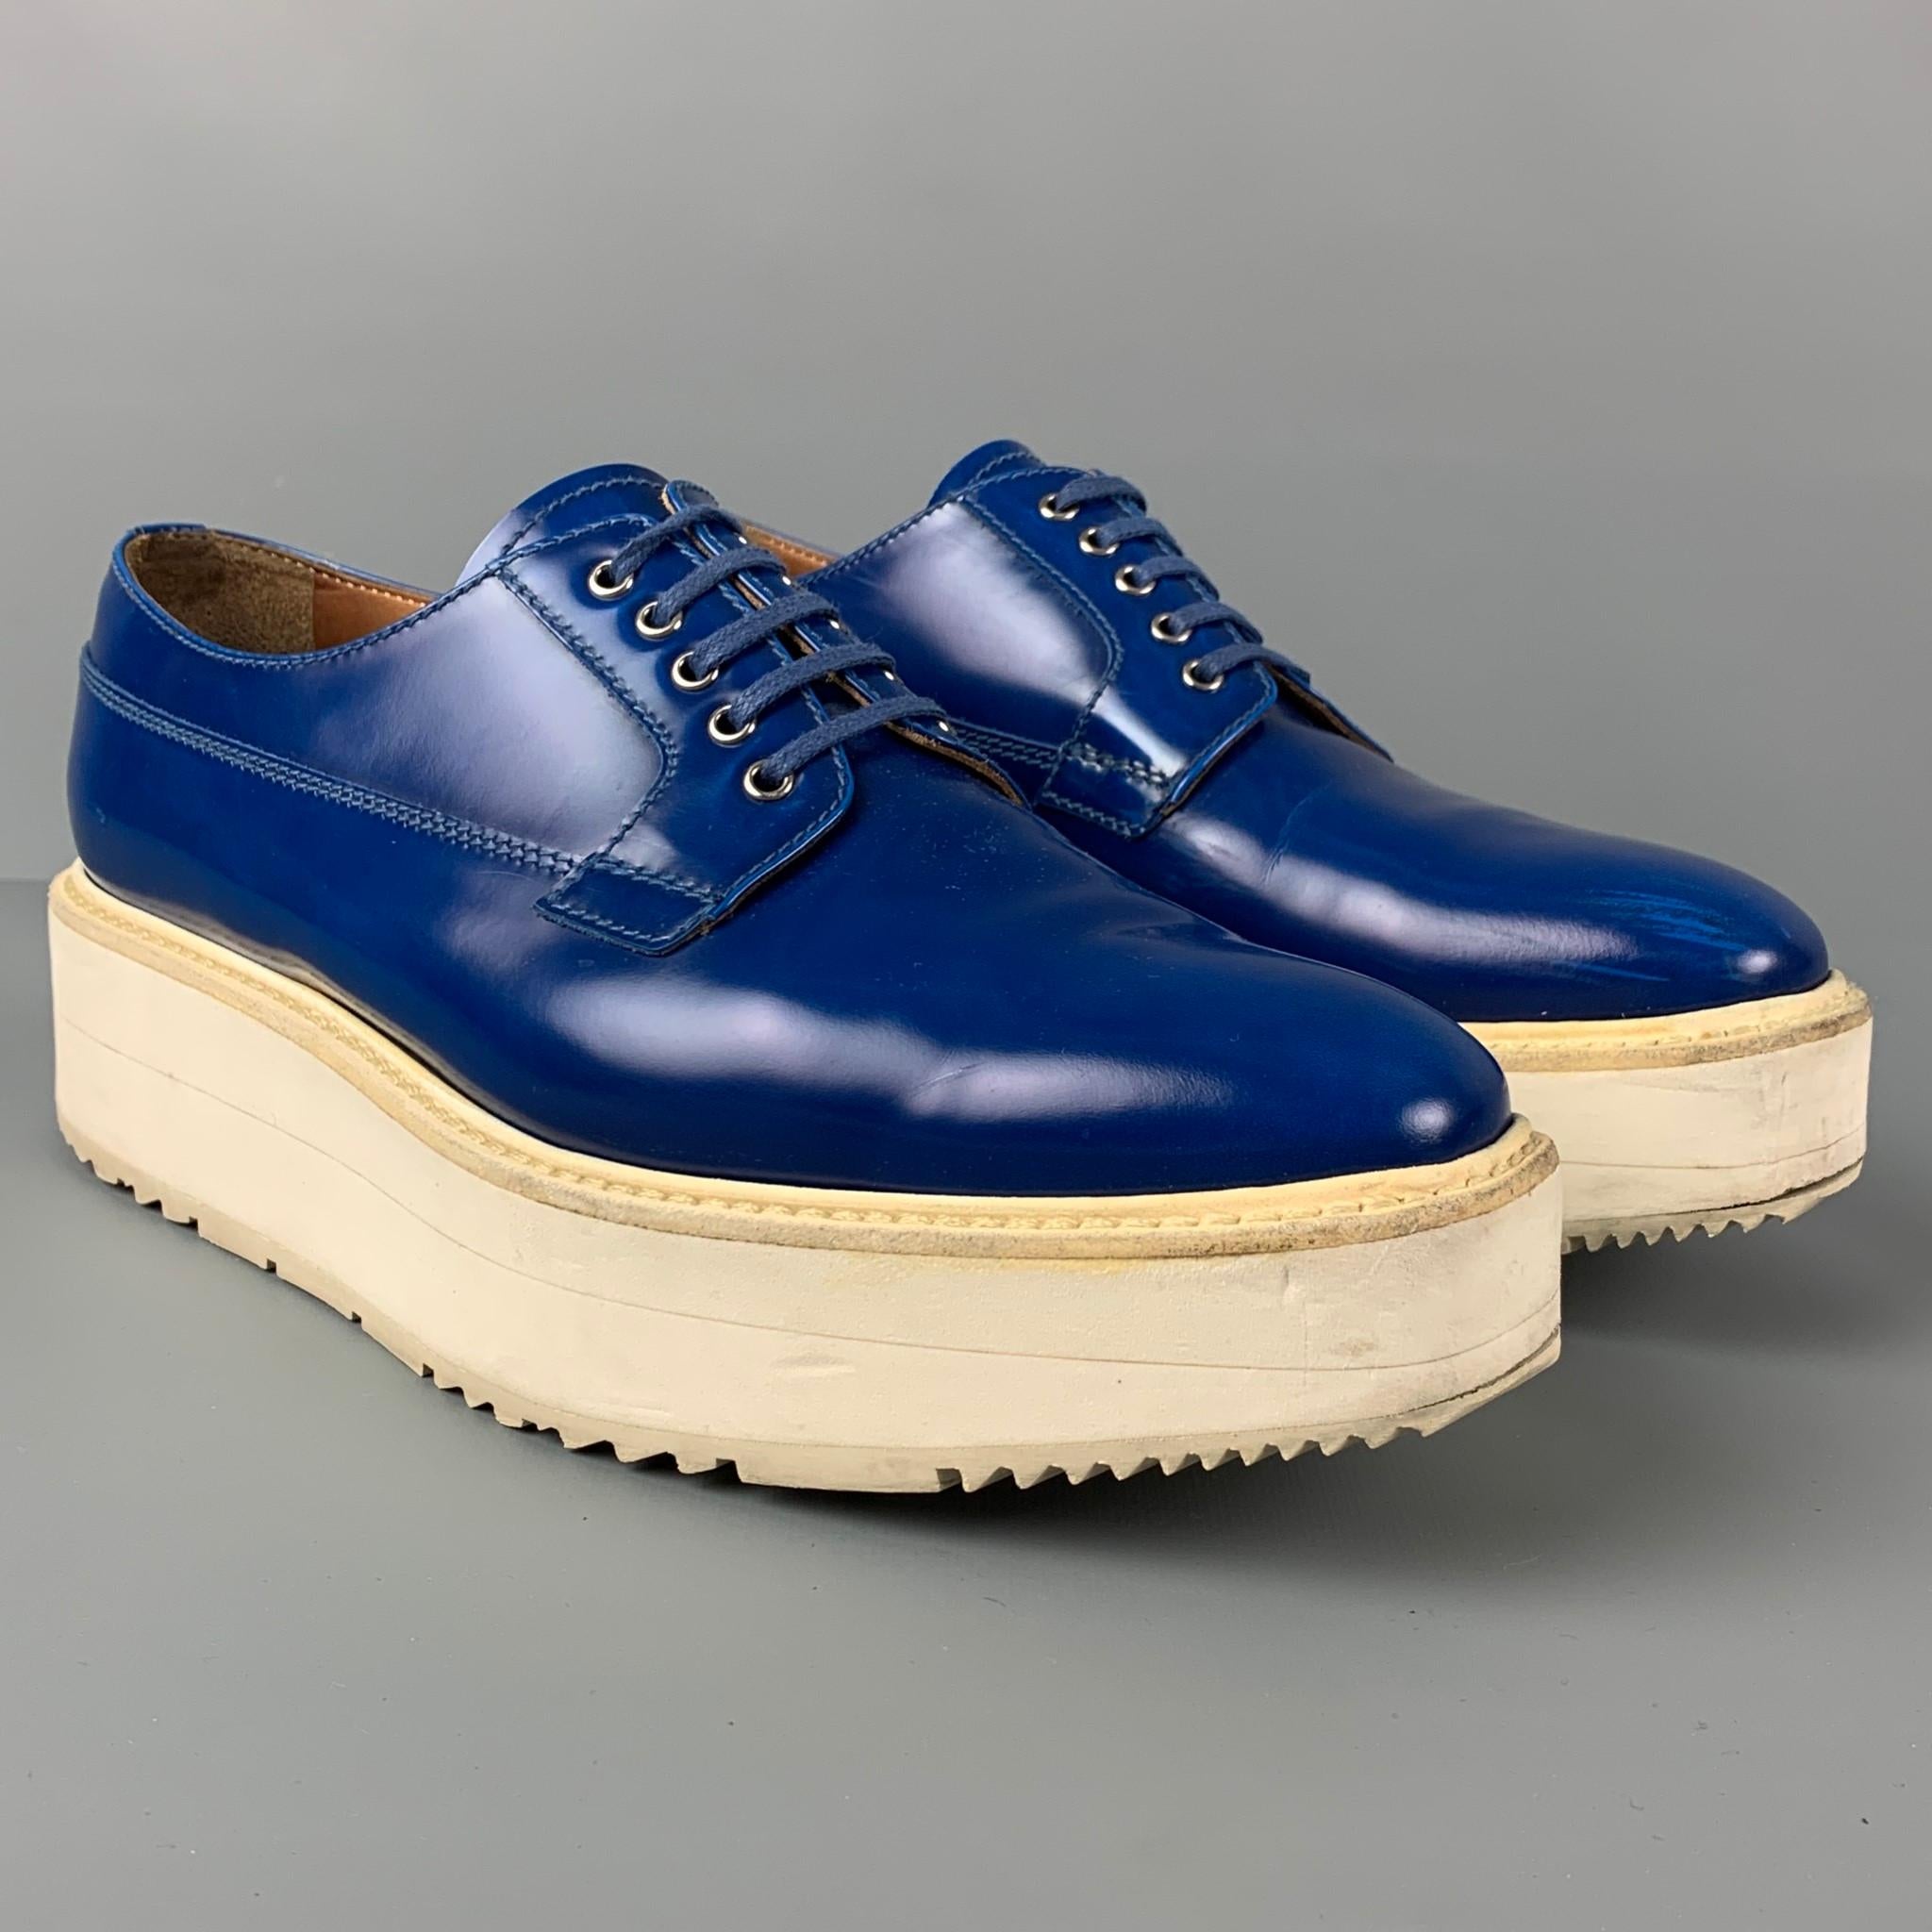 PRADA shoes comes in a royal blue leather featuring a square toe, platform, and a lace up closure. Includes box. Made in Italy. 

Very Good Pre-Owned Condition.
Marked: 41
Original Retail Price: $950.00

Outsole: 11.5 in. x 4 in. 